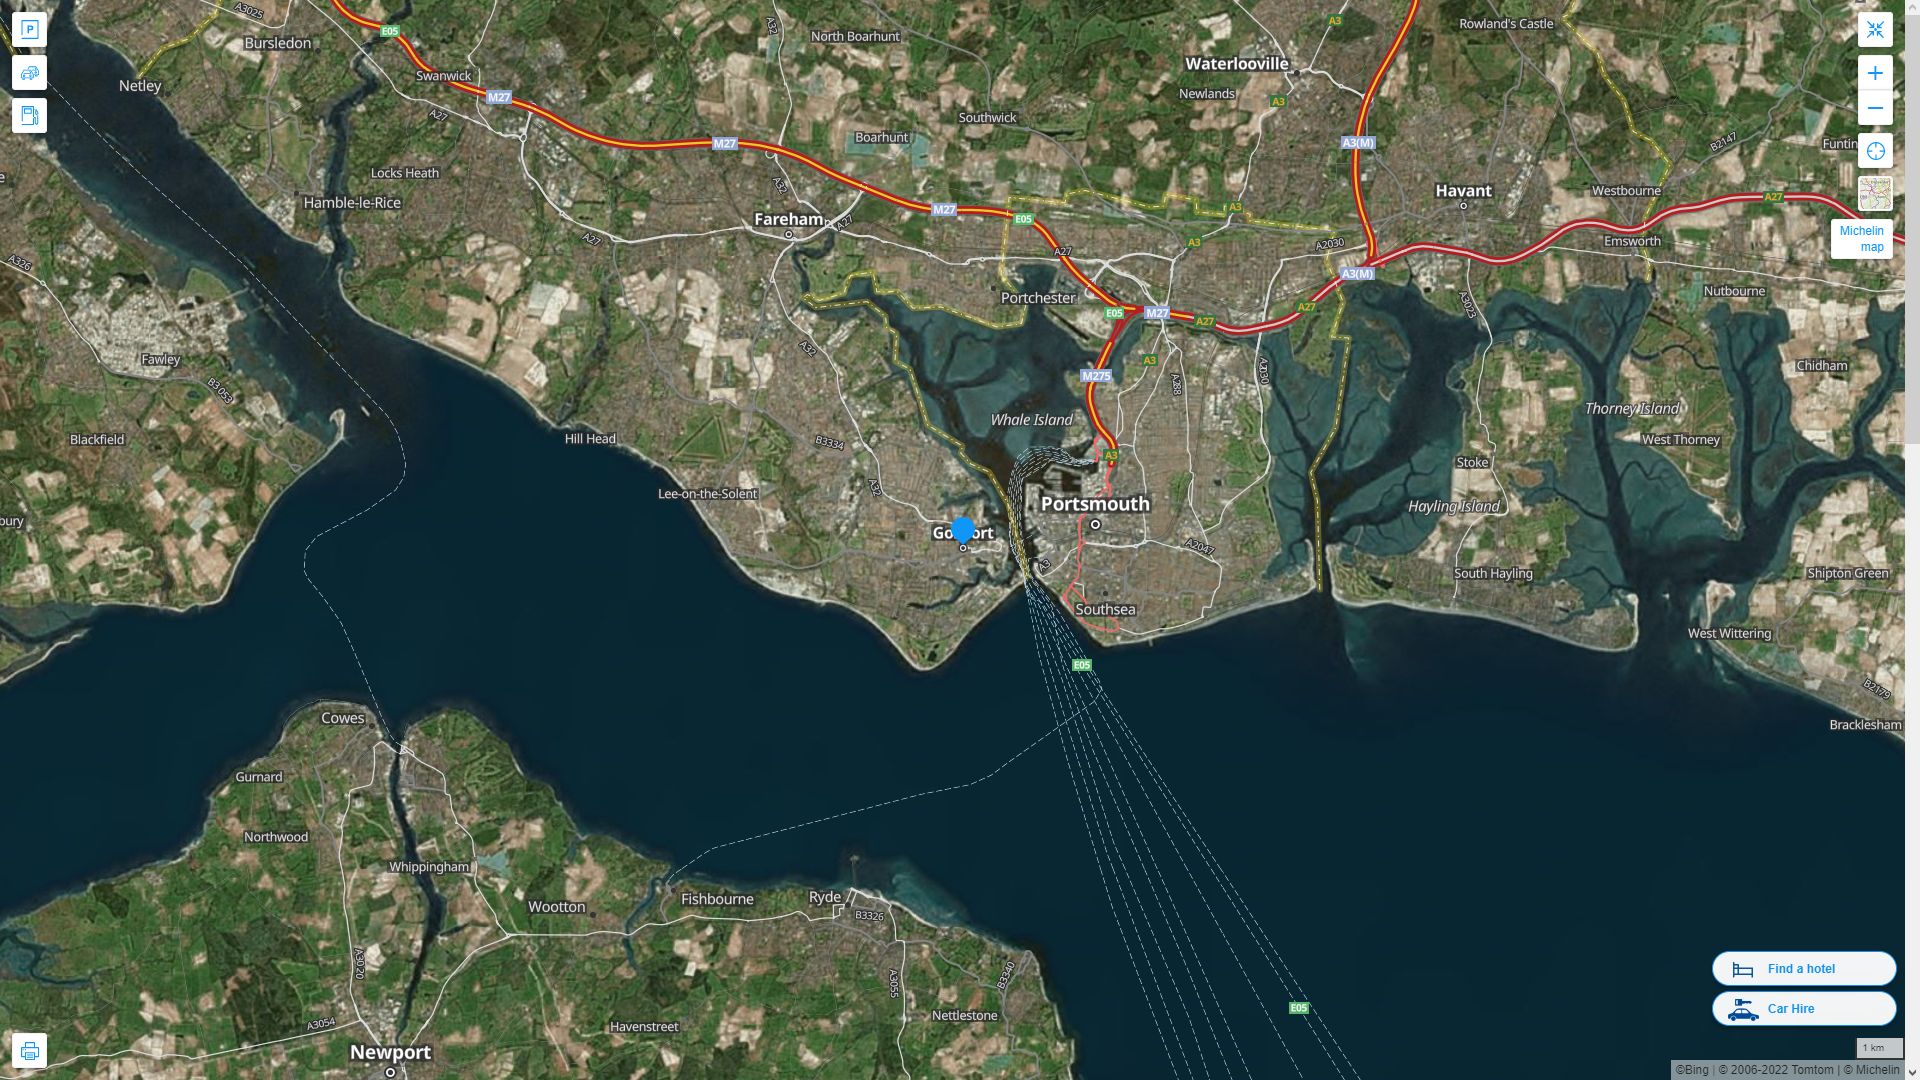 Gosport Highway and Road Map with Satellite View